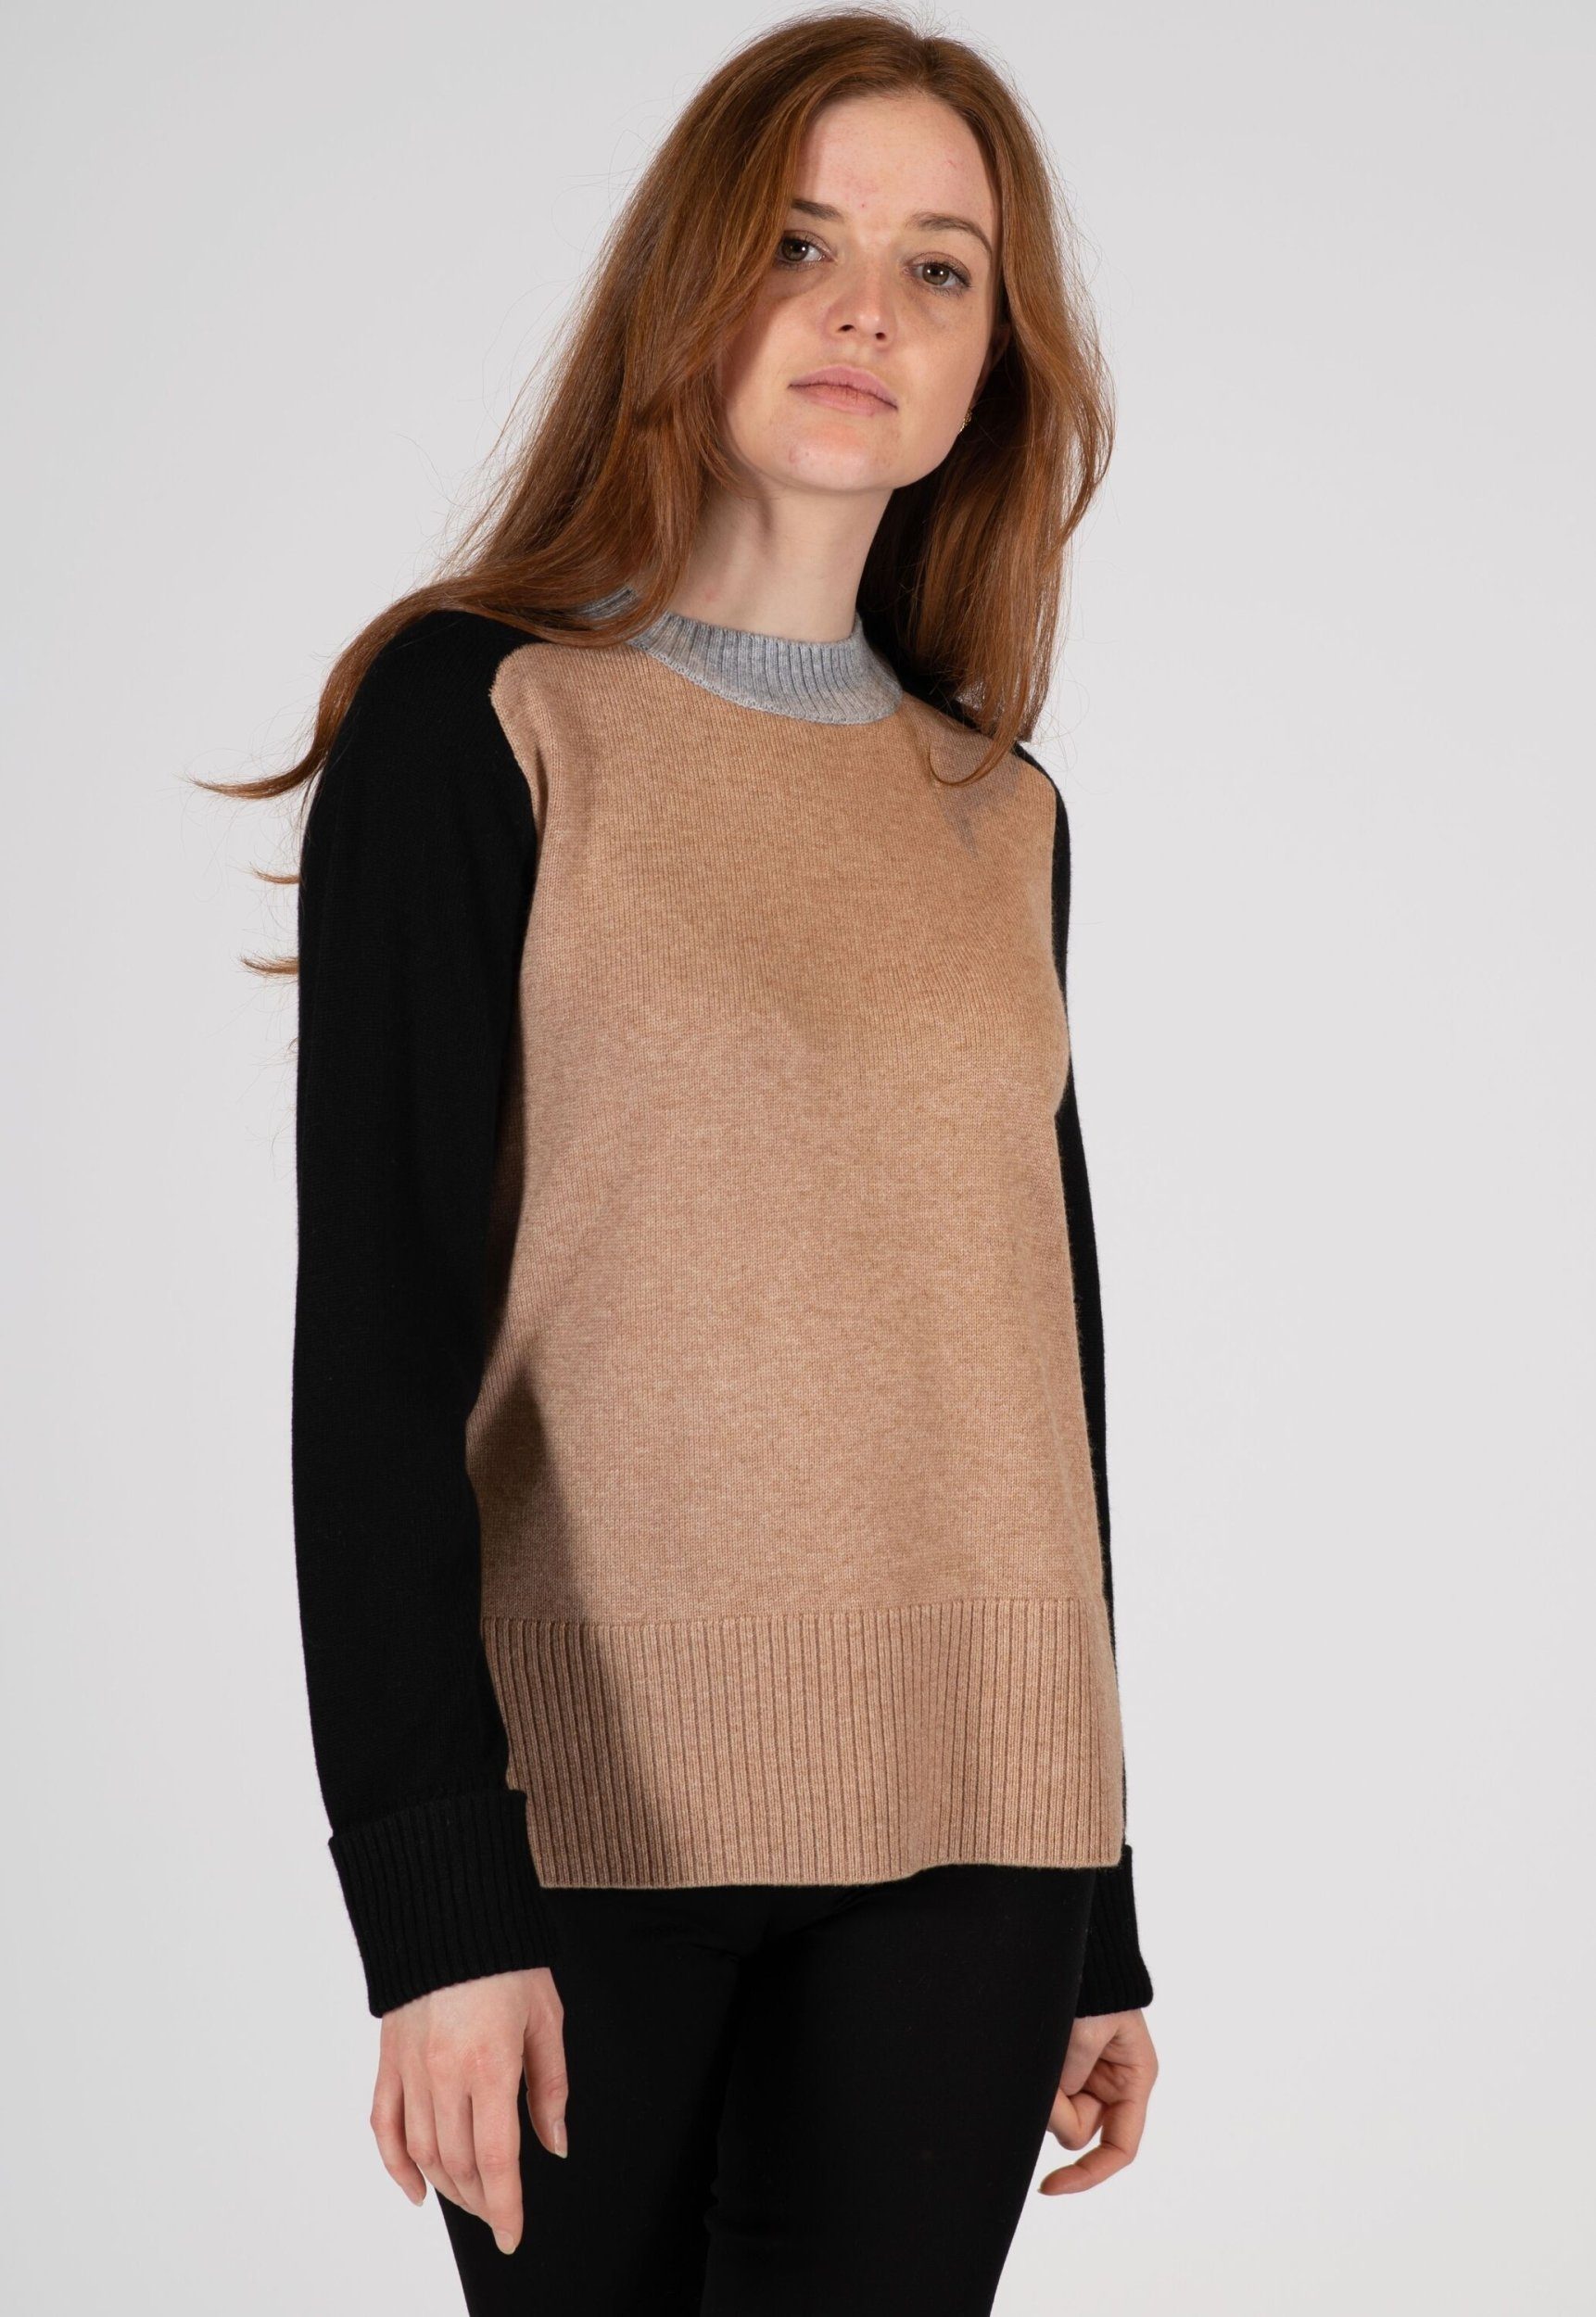 THE FASHION PEOPLE Rundhalspullover Sweater knitted, multicolor SOFT NOUGAT MULTICOL